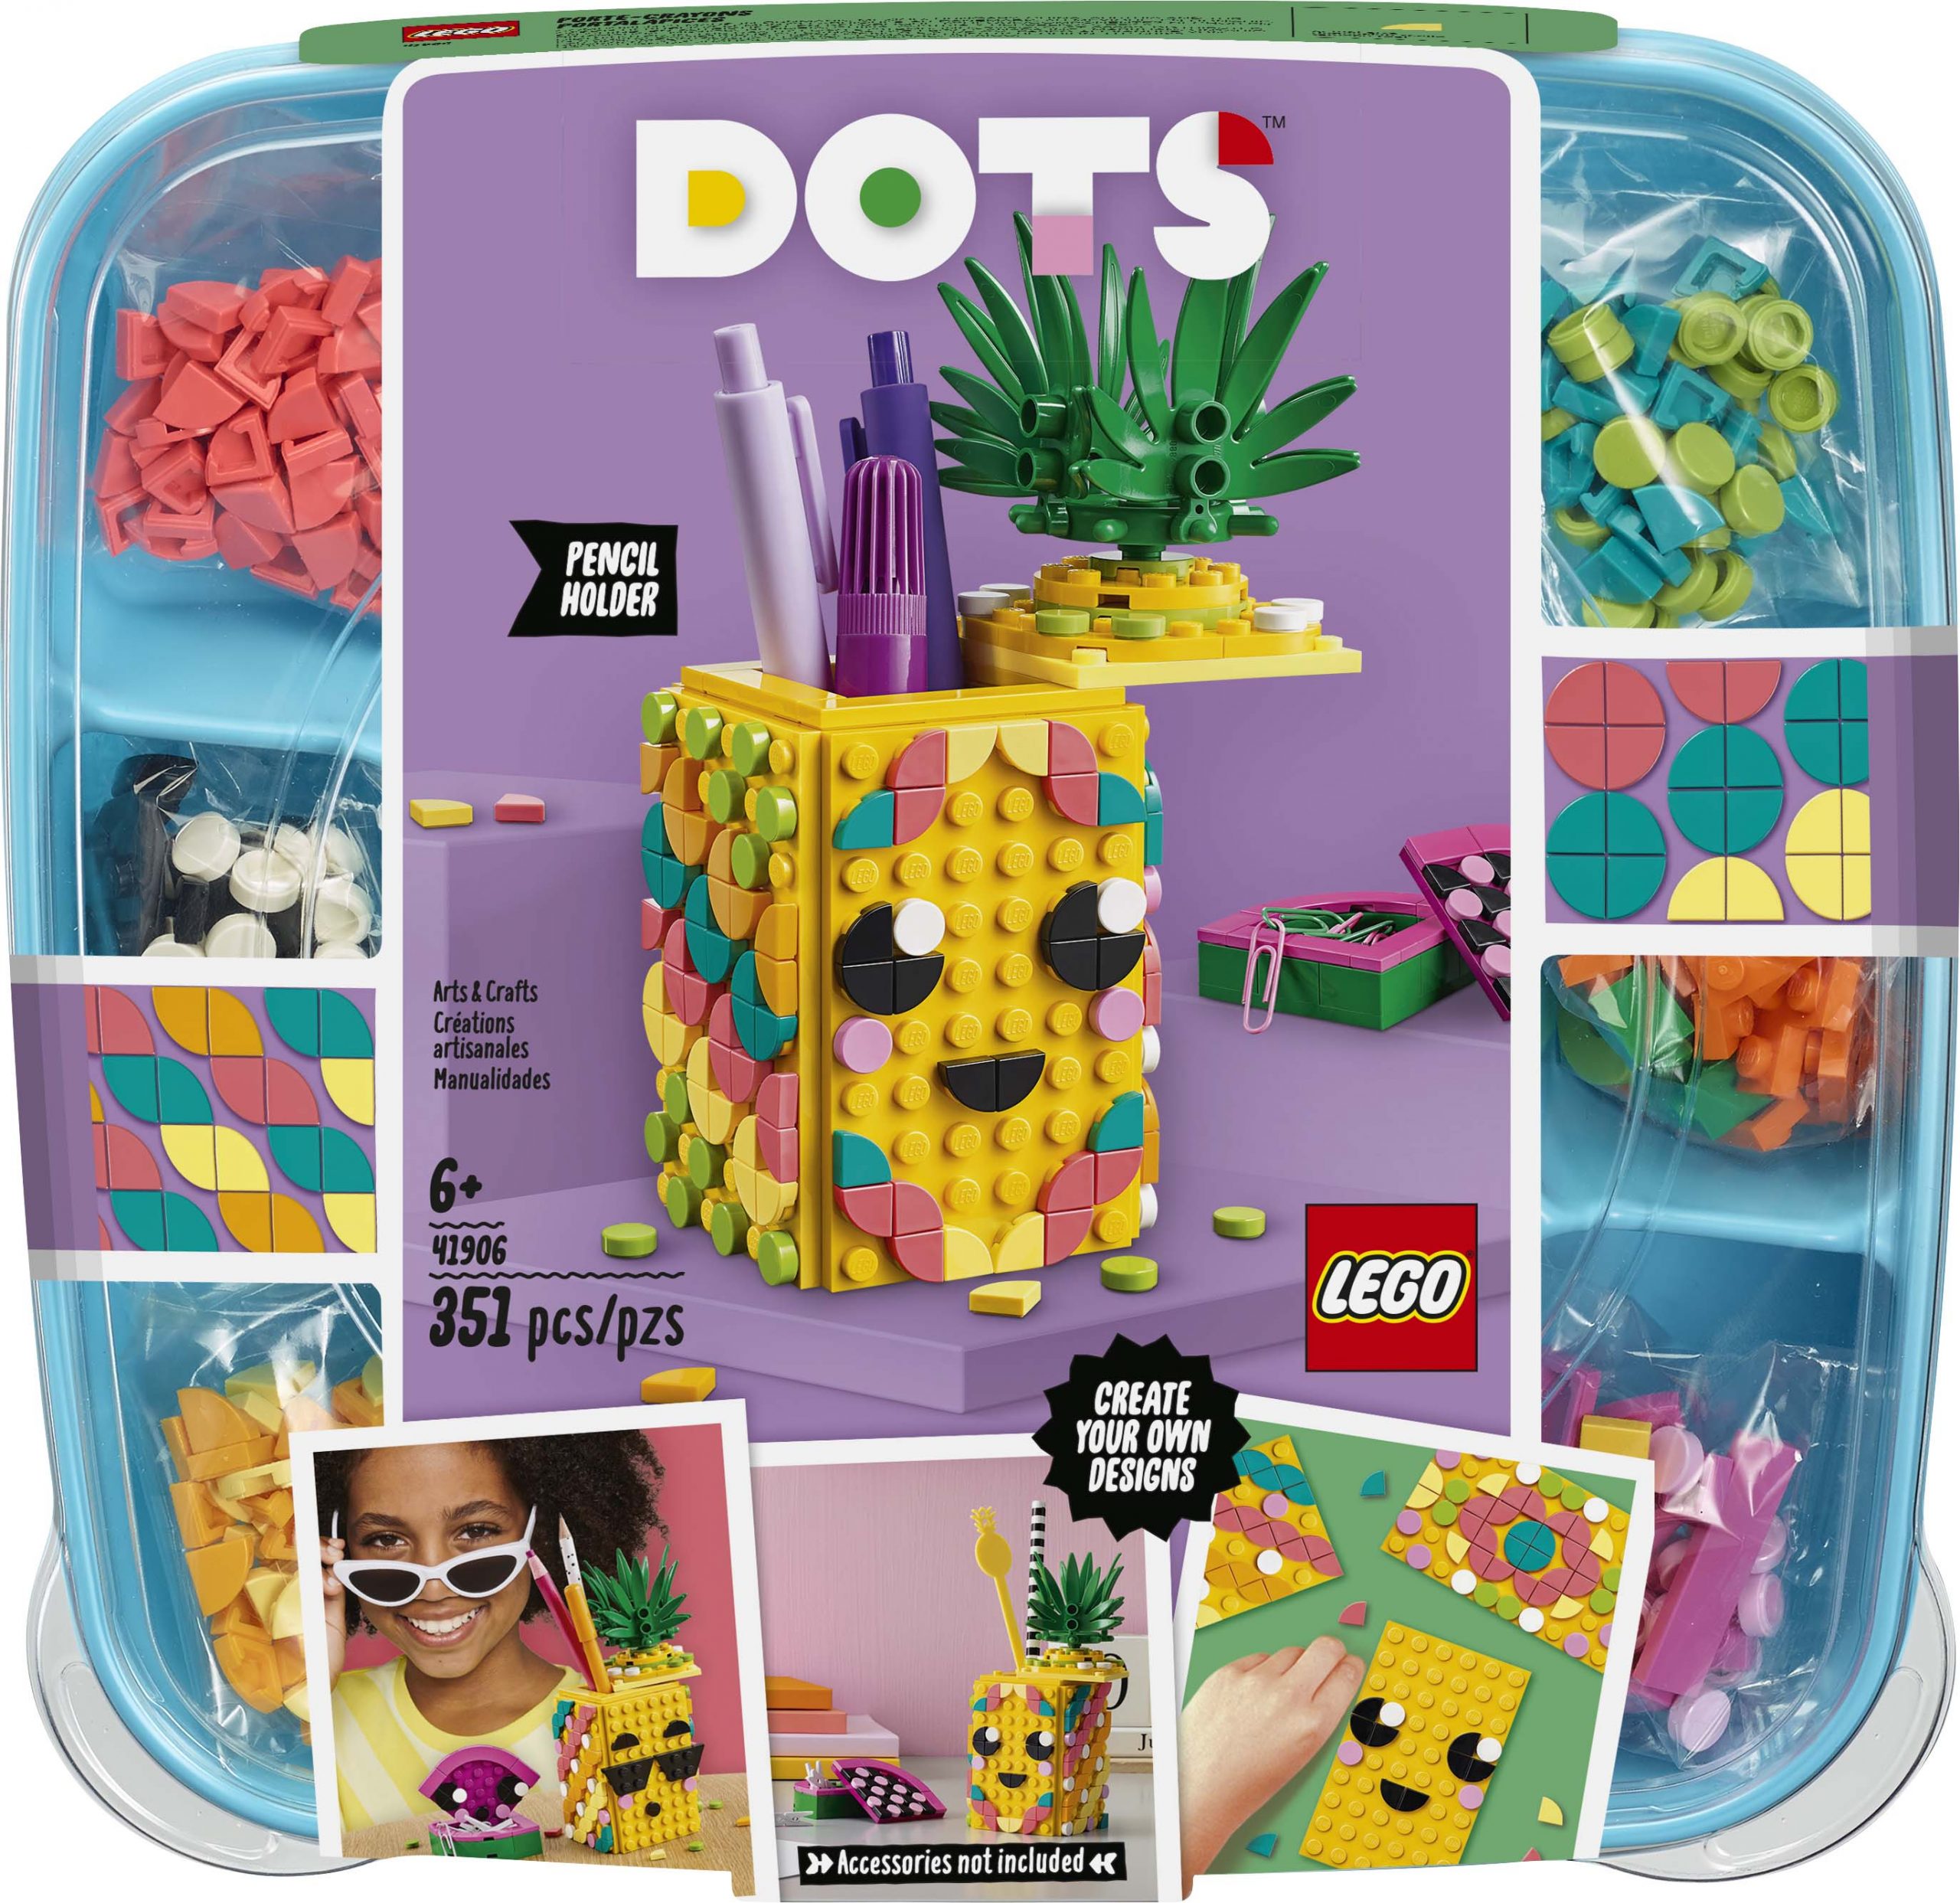 LEGO DOTS Officially Announced - The Brick Fan